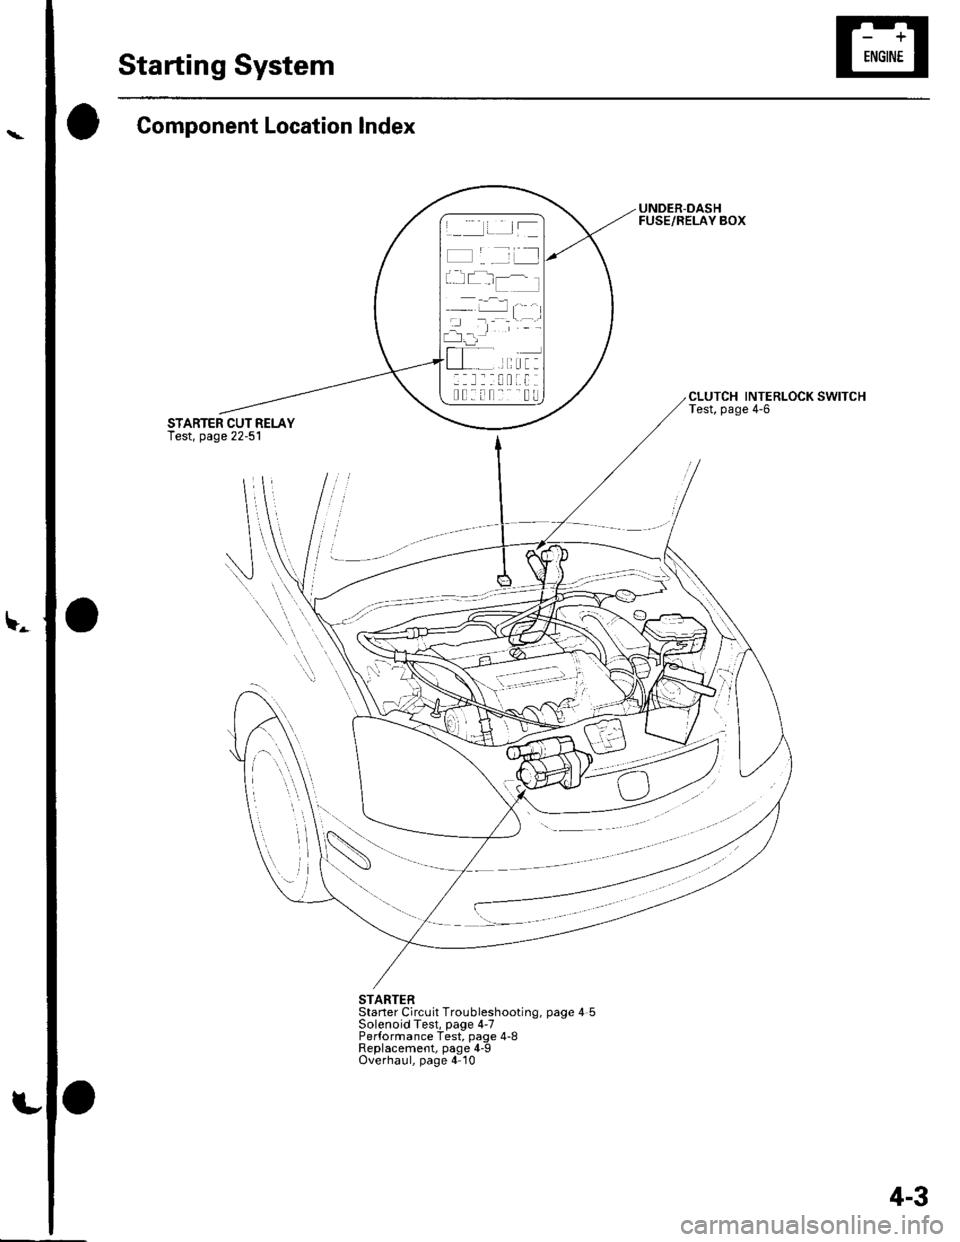 HONDA CIVIC 2002 7.G Owners Guide \-
Starting System
Component Location Index
UNDER-DASHFUSE/RELAY BOX
CLUTCH INTERLOCK SWITCHTest, page 4-6
STARTERStaner Circuit Troubleshoot,ng, page 4 5Solenoid Test, page 4-7Performance Test, page 